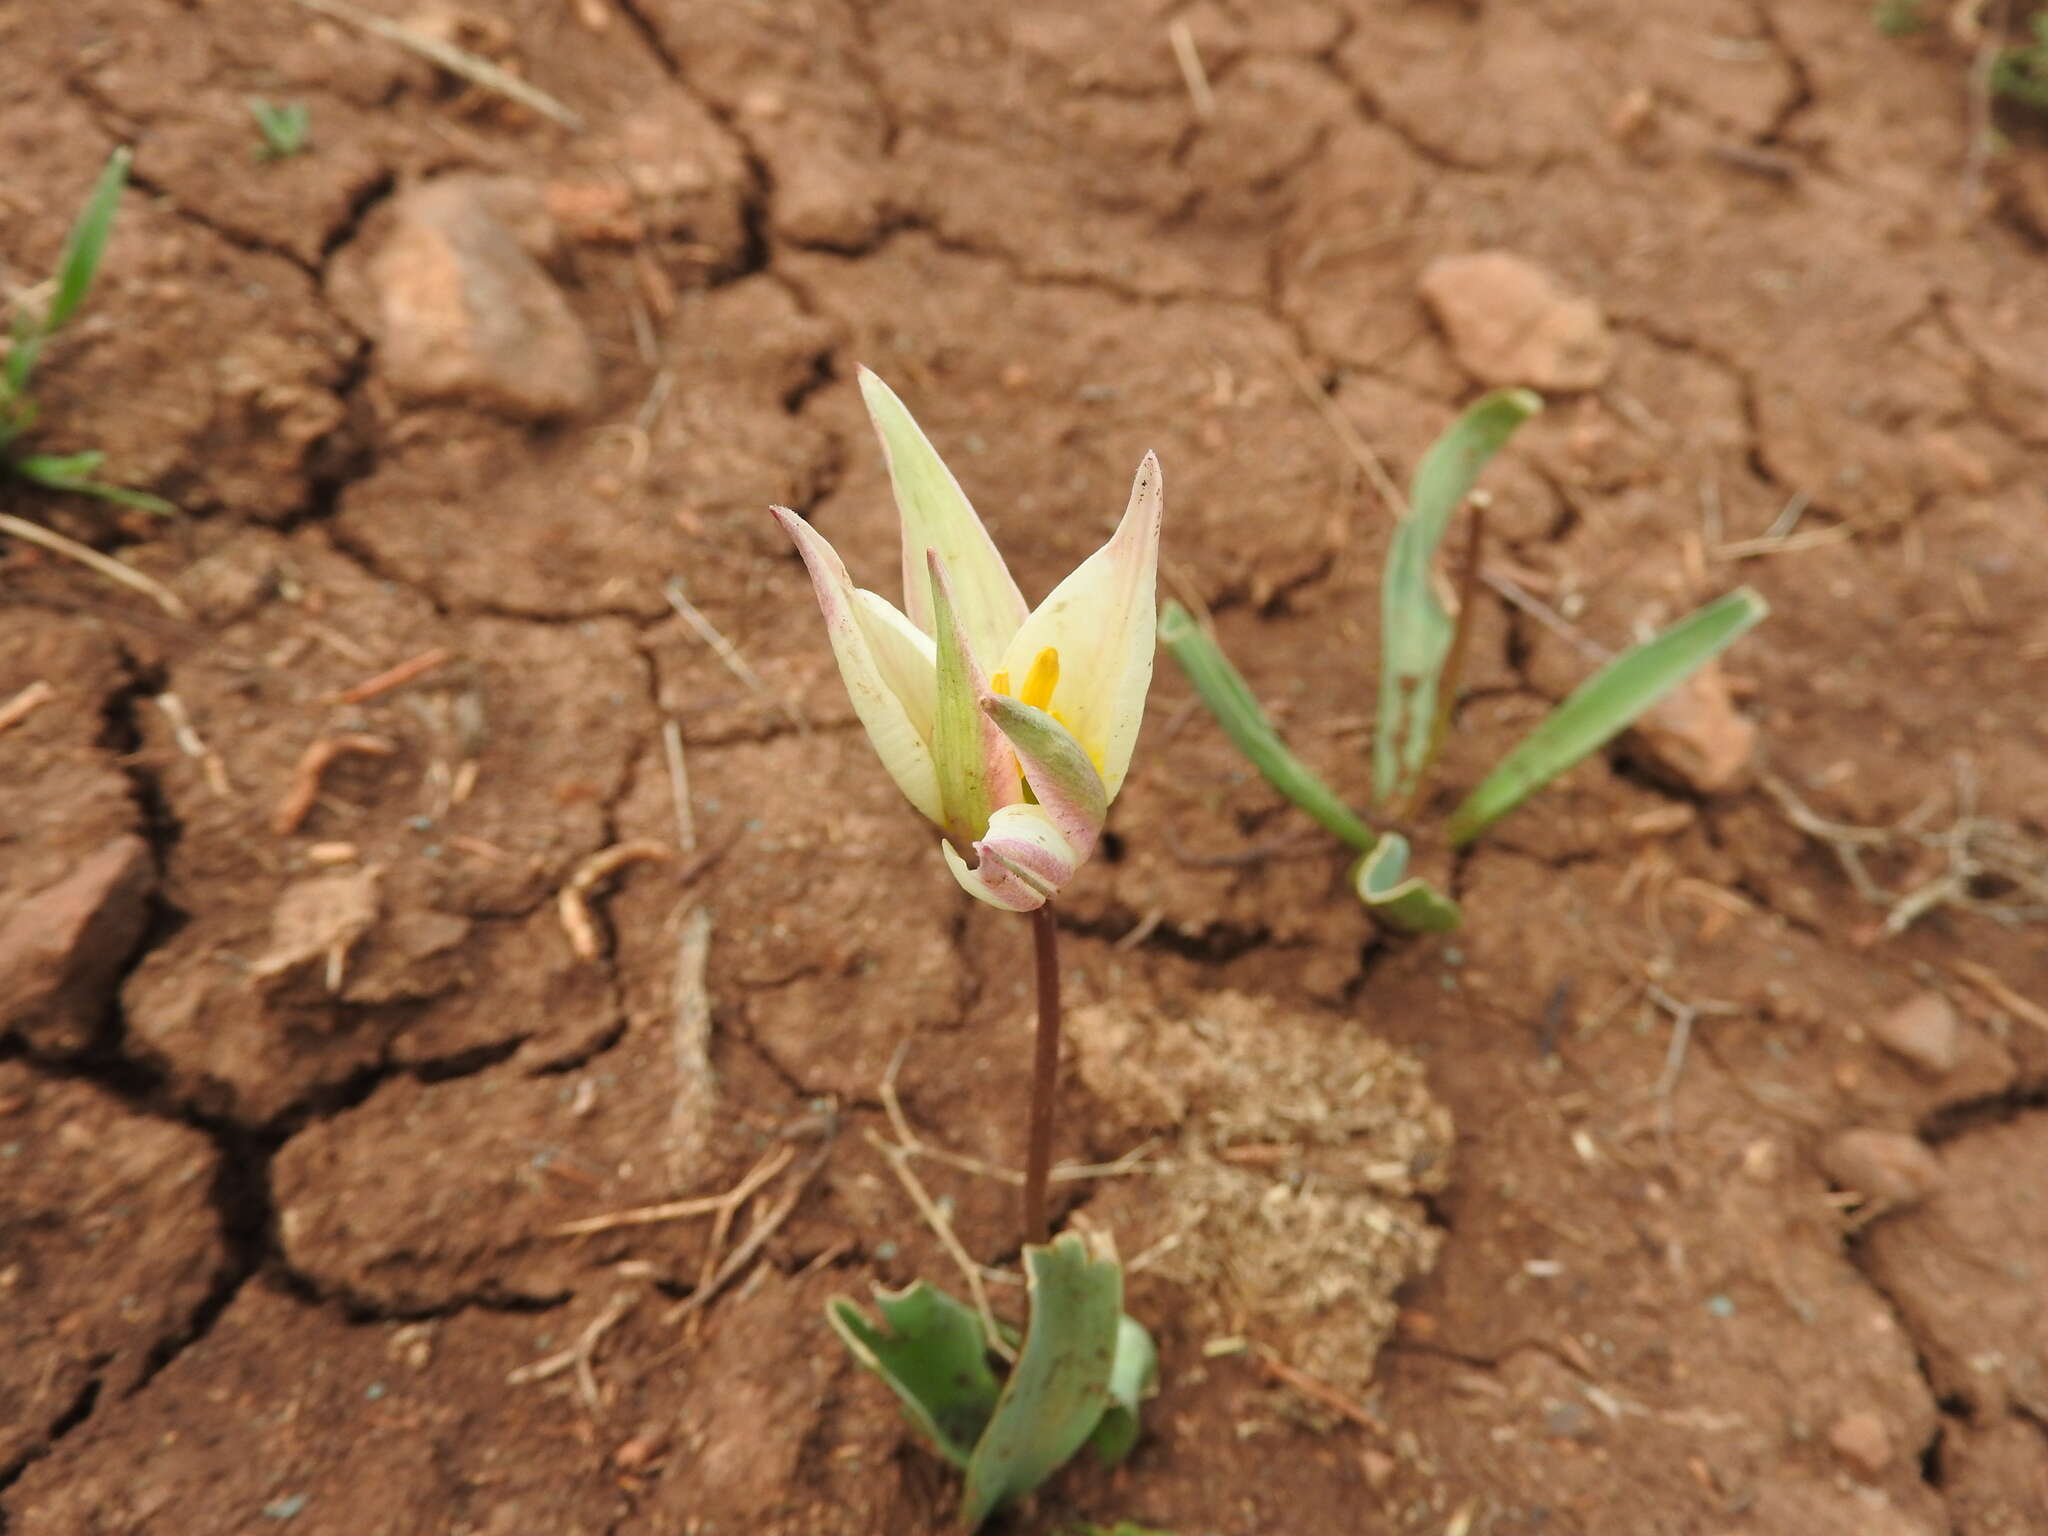 Image of Tulipa sylvestris subsp. primulina (Baker) Maire & Weiller